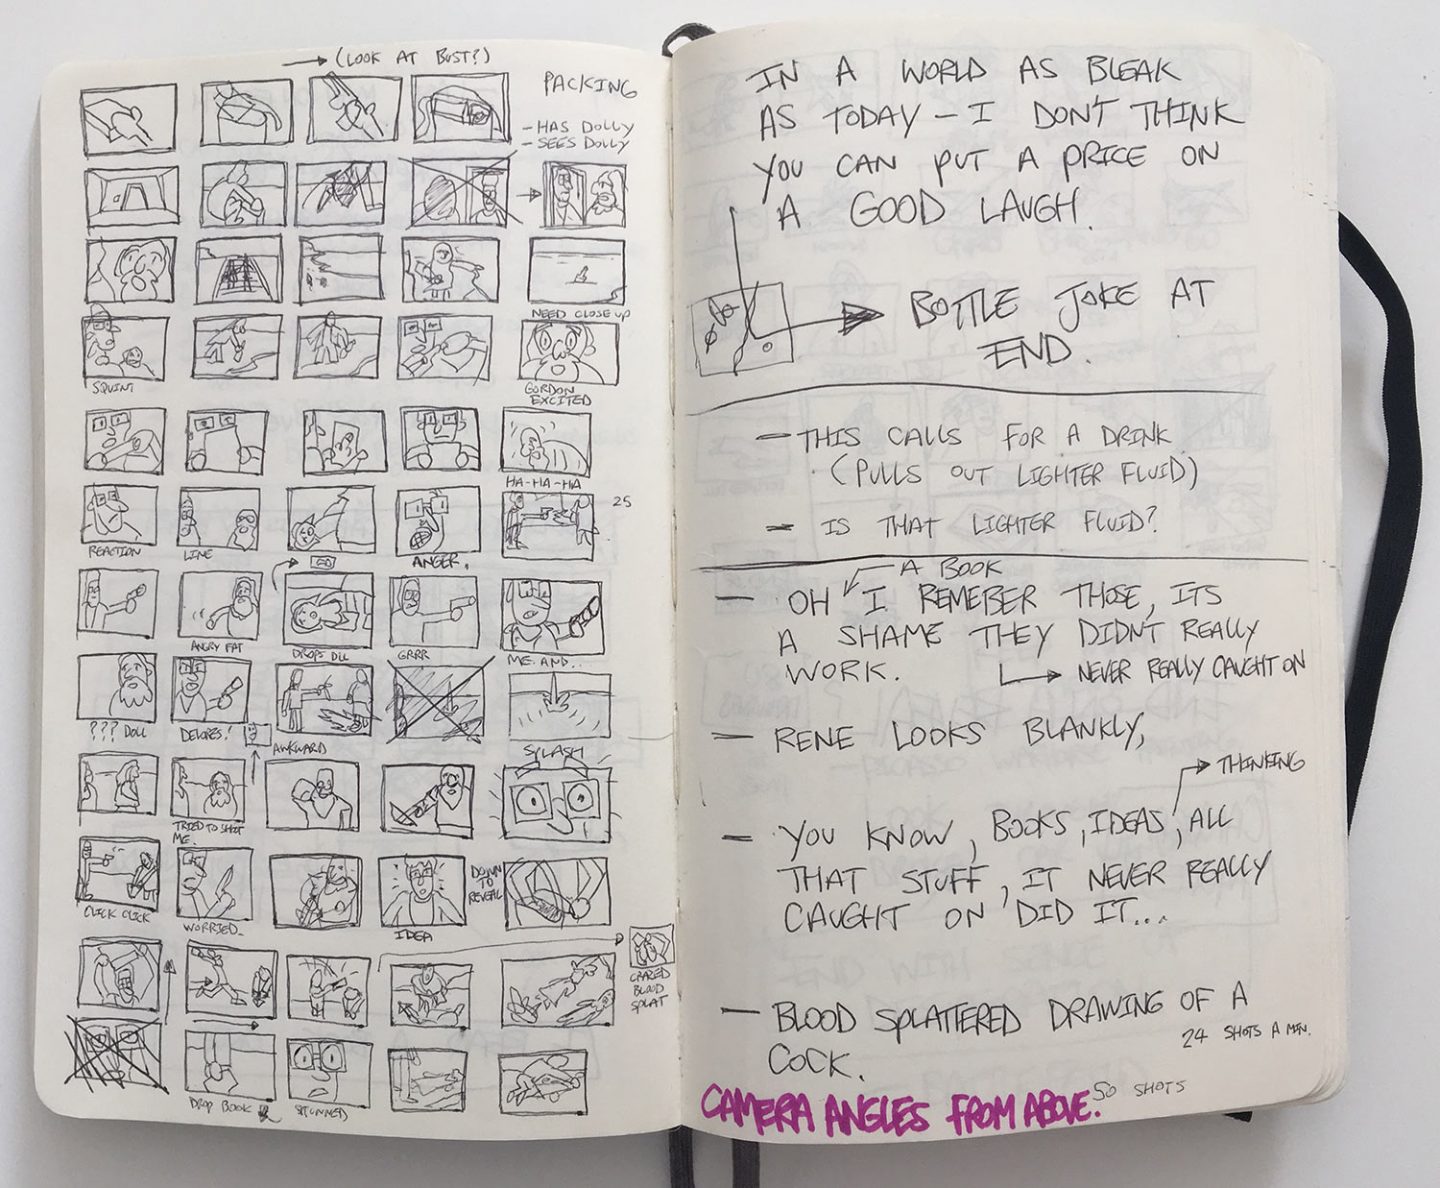  An example of one of Southward’s notebook pages in which he quickly drew out thumbnailed storyboards for "After The End."